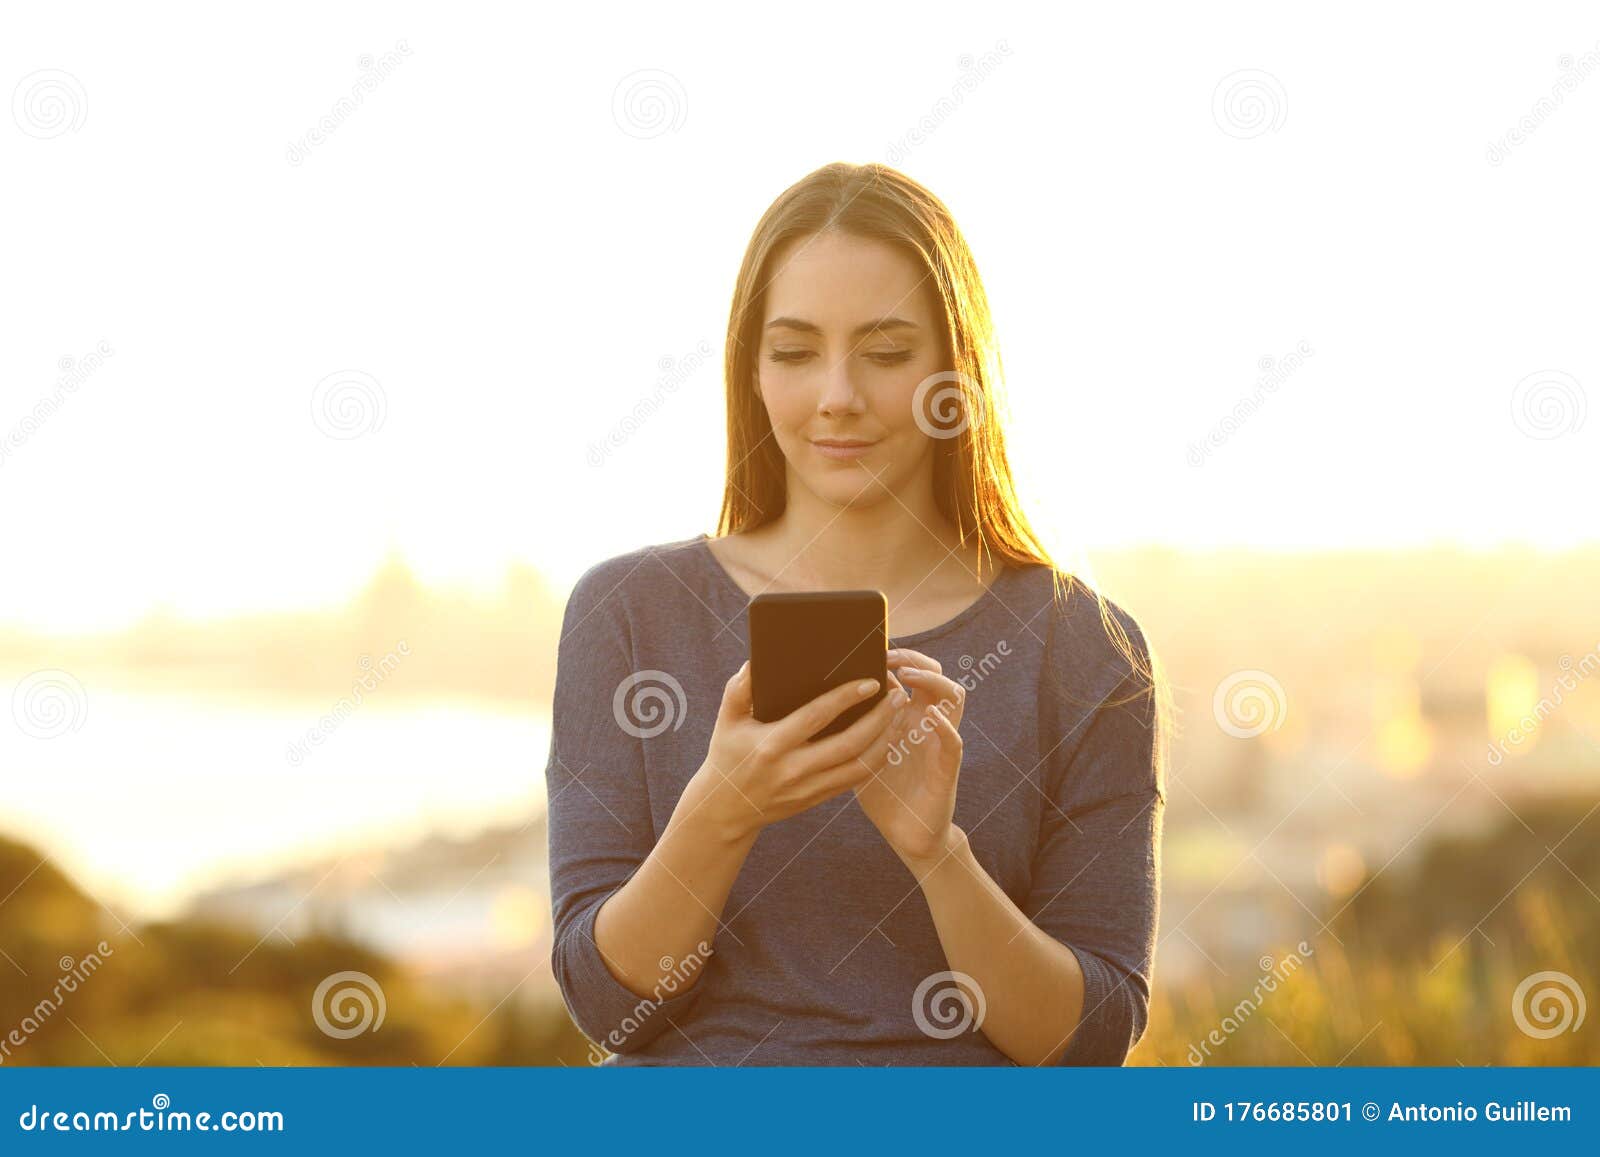 woman using smart phone on the outskirts at sunset